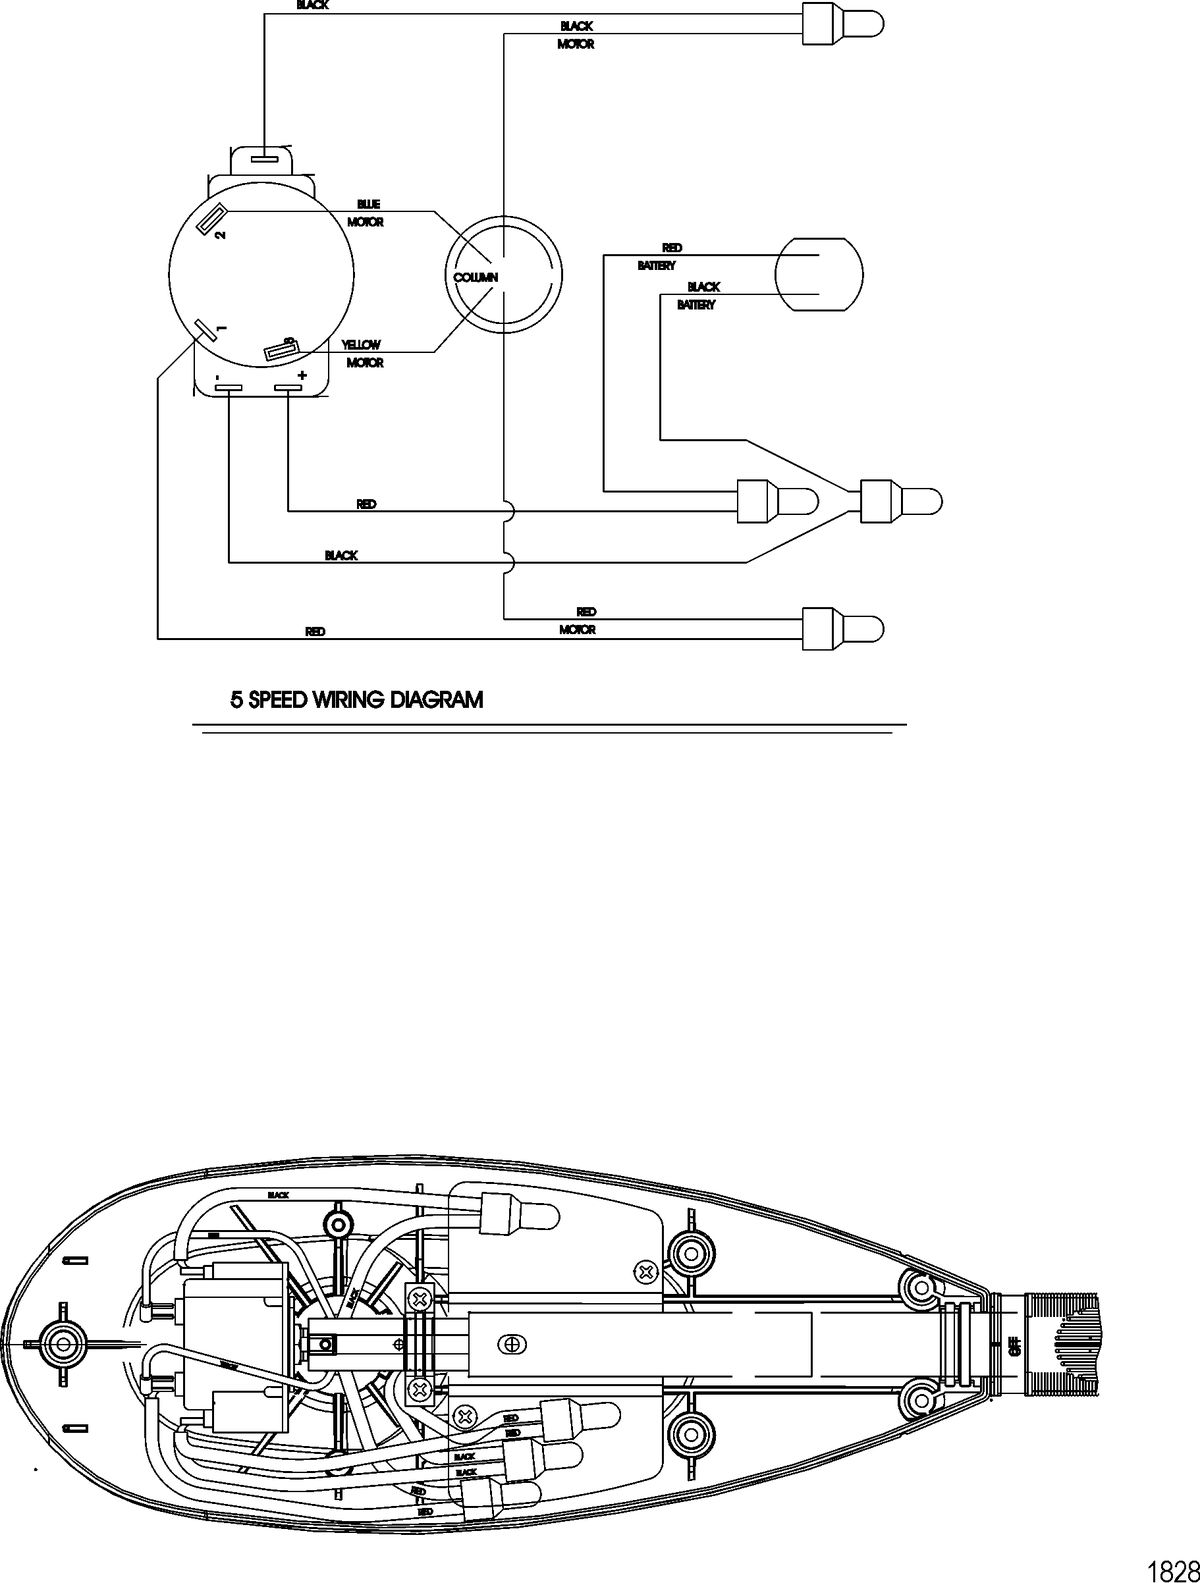 TROLLING MOTOR MOTORGUIDE FRESH WATER SERIES Wire Diagram(Model FW54HP) (Without Quick Connect)